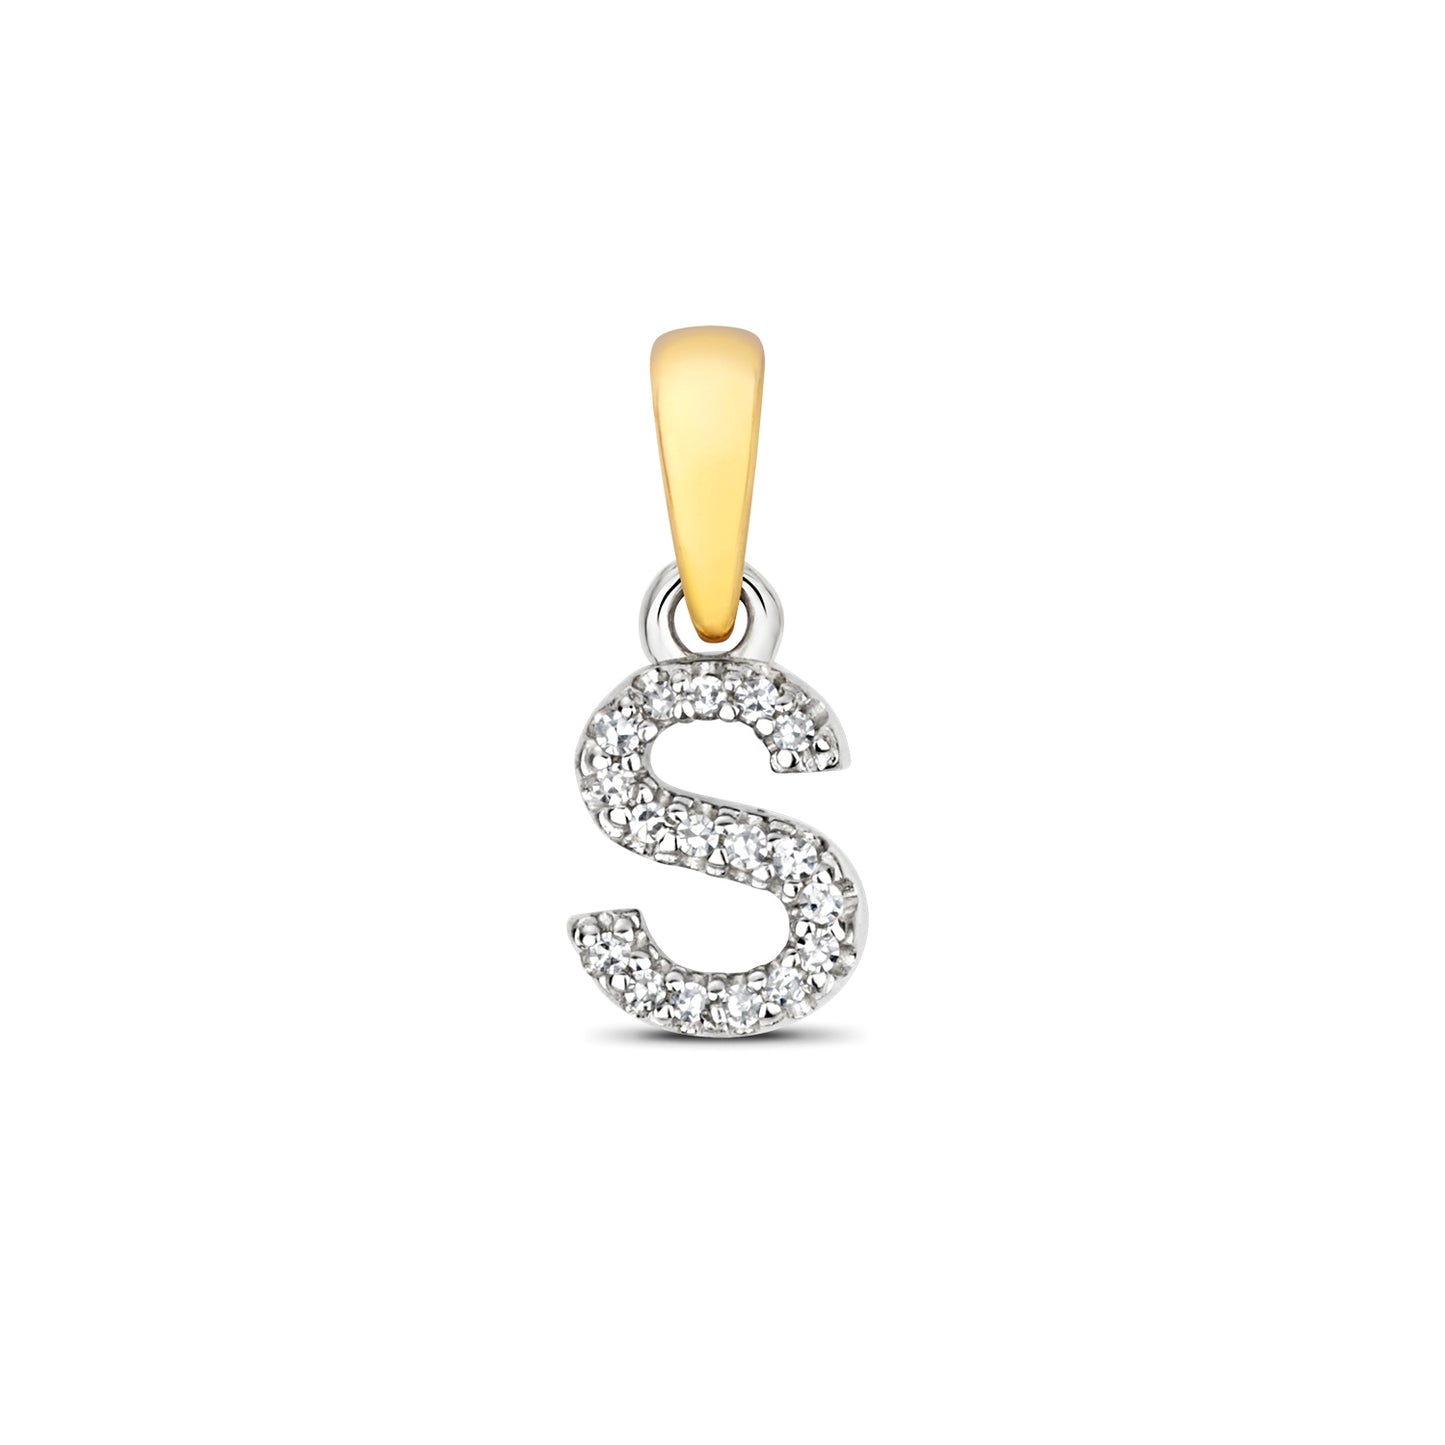 Diamond and 9ct Gold "S" Initial Pendant